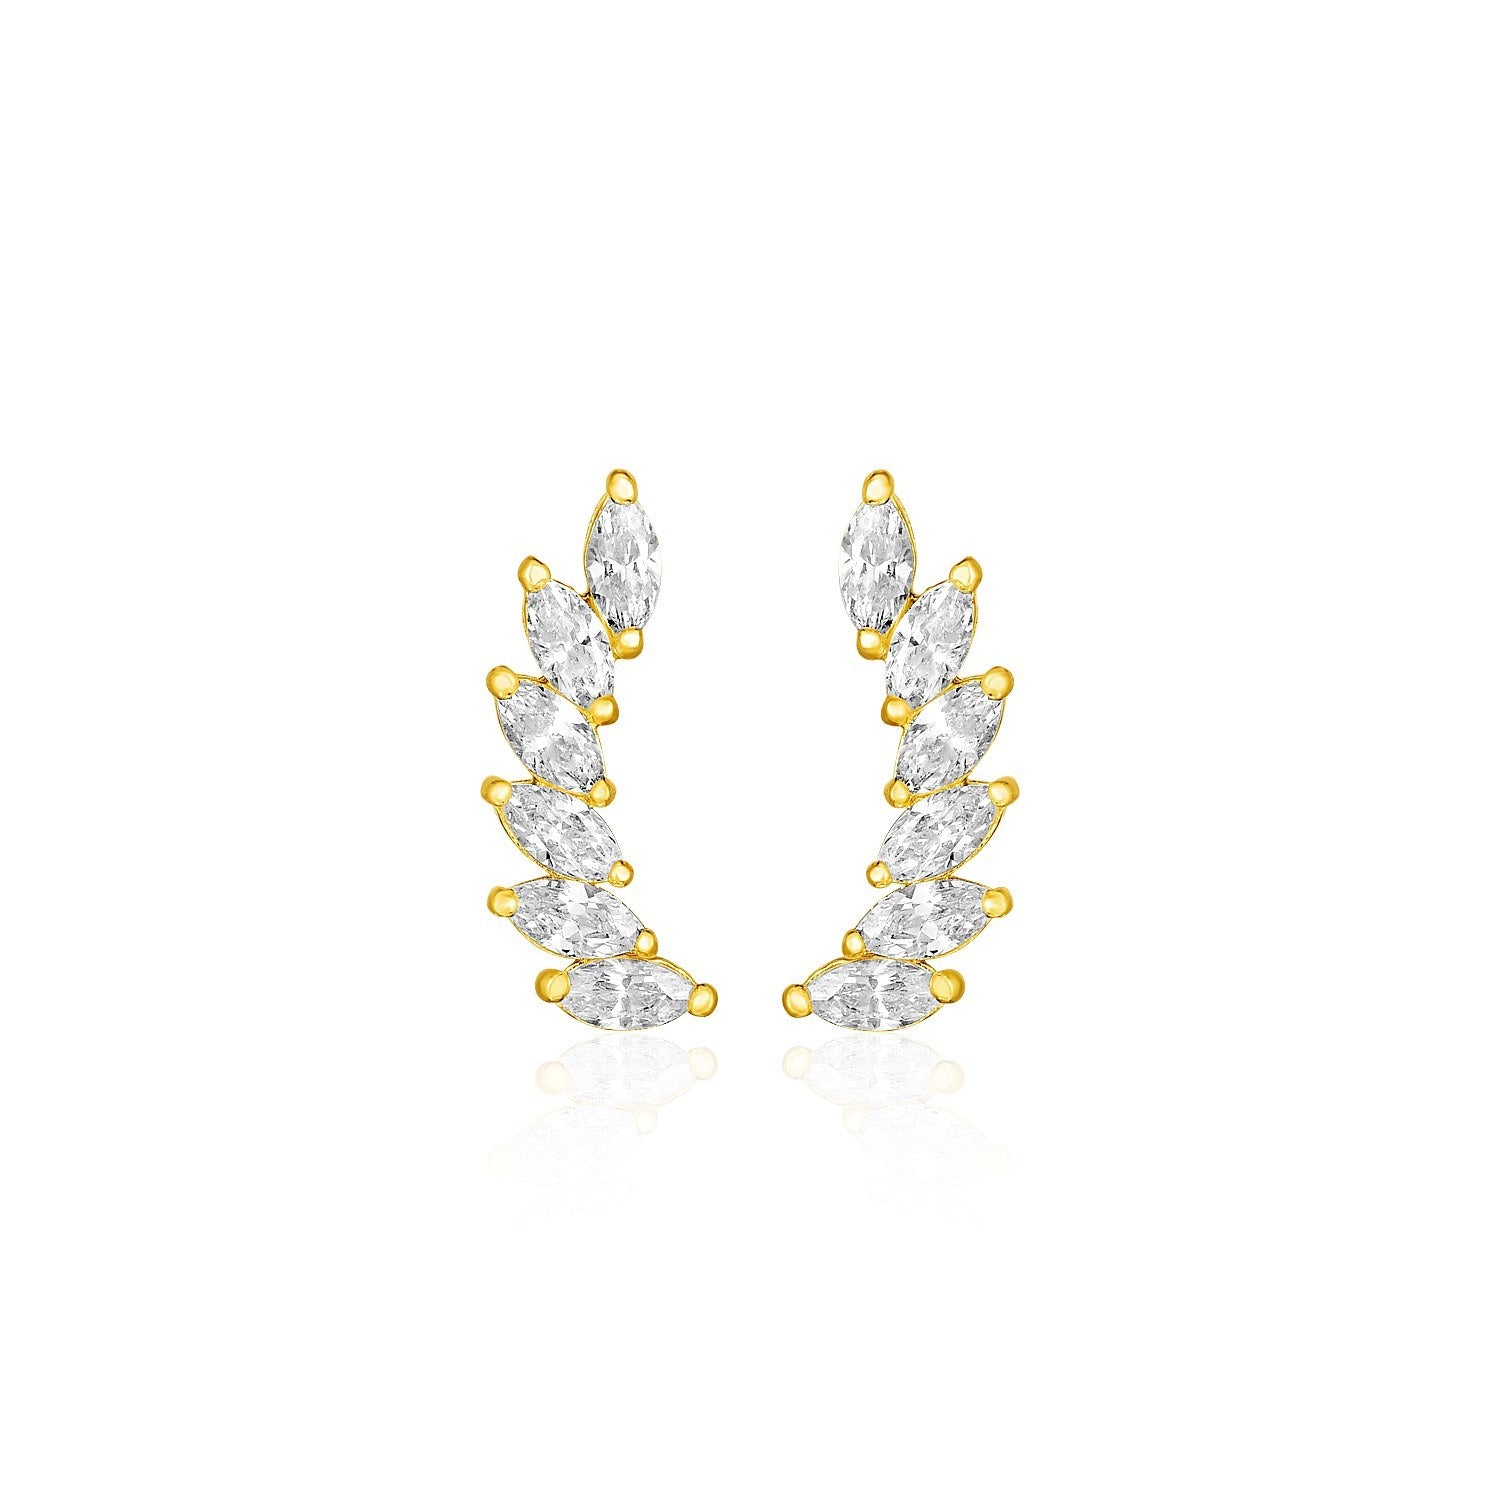 Leaf Motif Climber Earrings with Marquise Cubic Zirconias